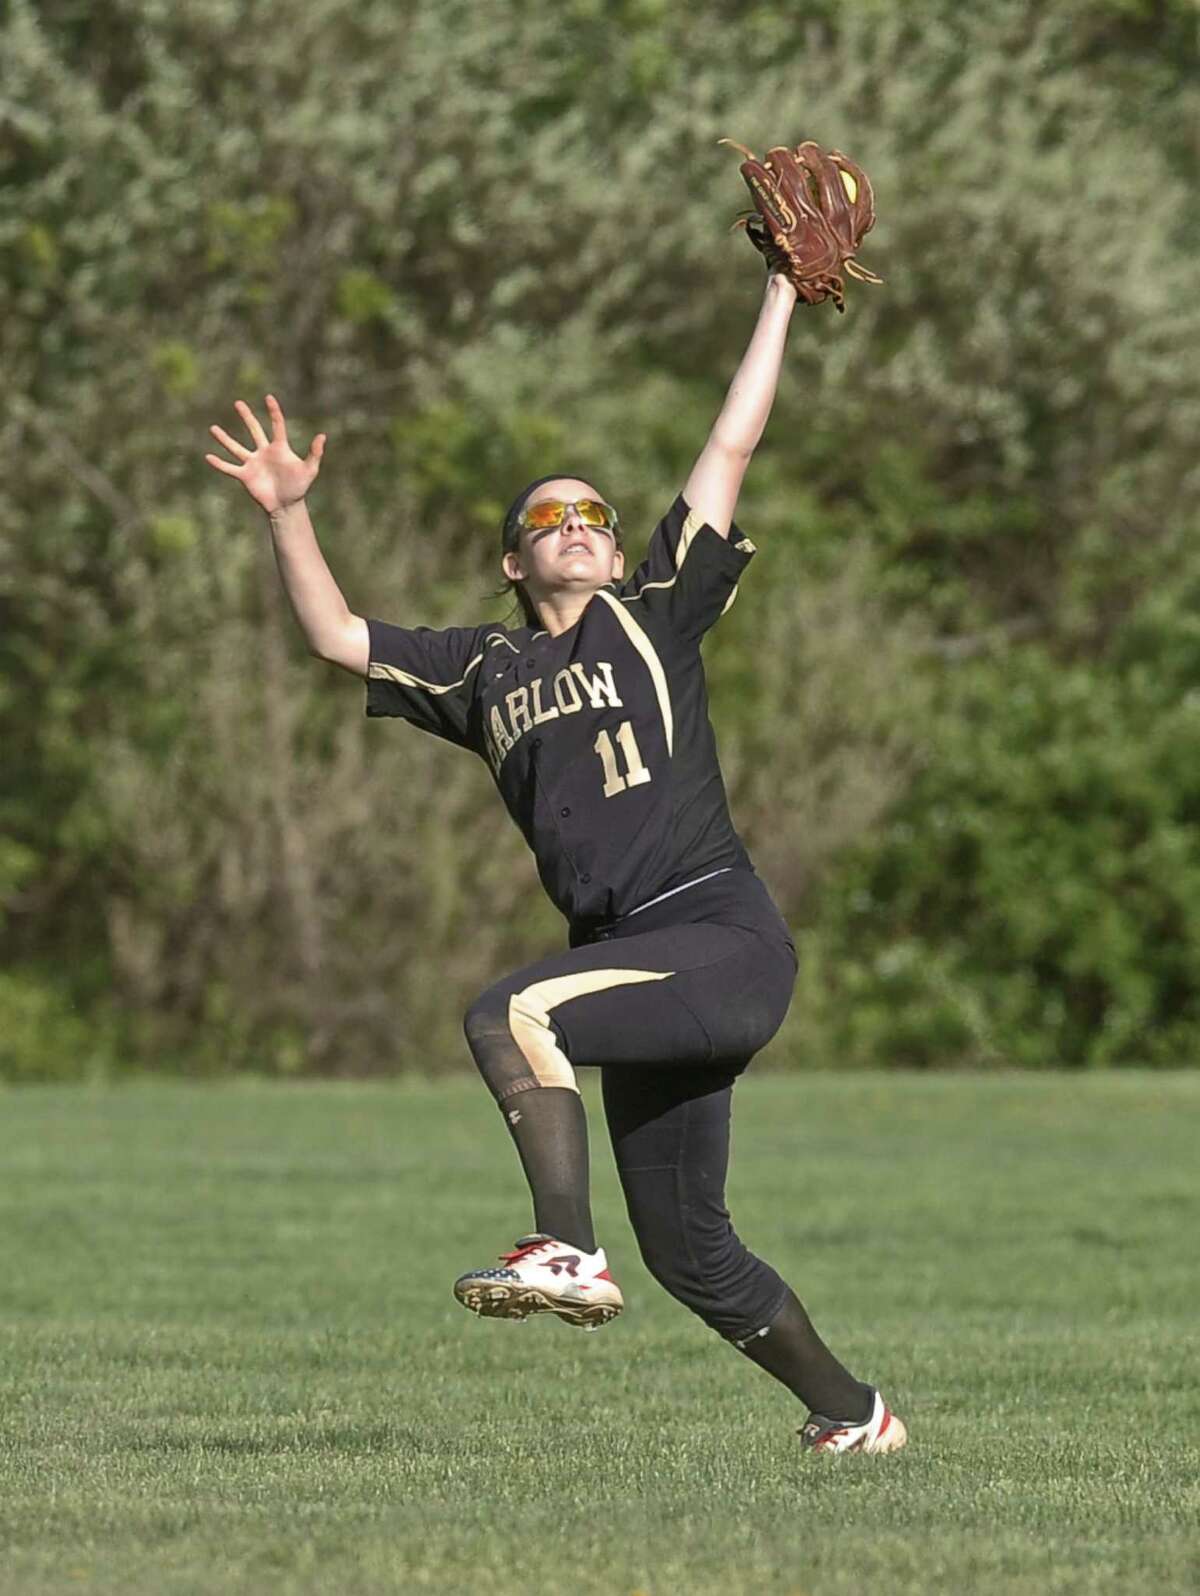 FILE PHOTO: Barlow's Kristen Acocella (11) makes a catch in the outfield for the final out of the girls high school softball game between Joel Barlow and Pomperaug high schools on Wednesday, May 13, 2015, played at Pomperaug High School, in Southbury, Conn.